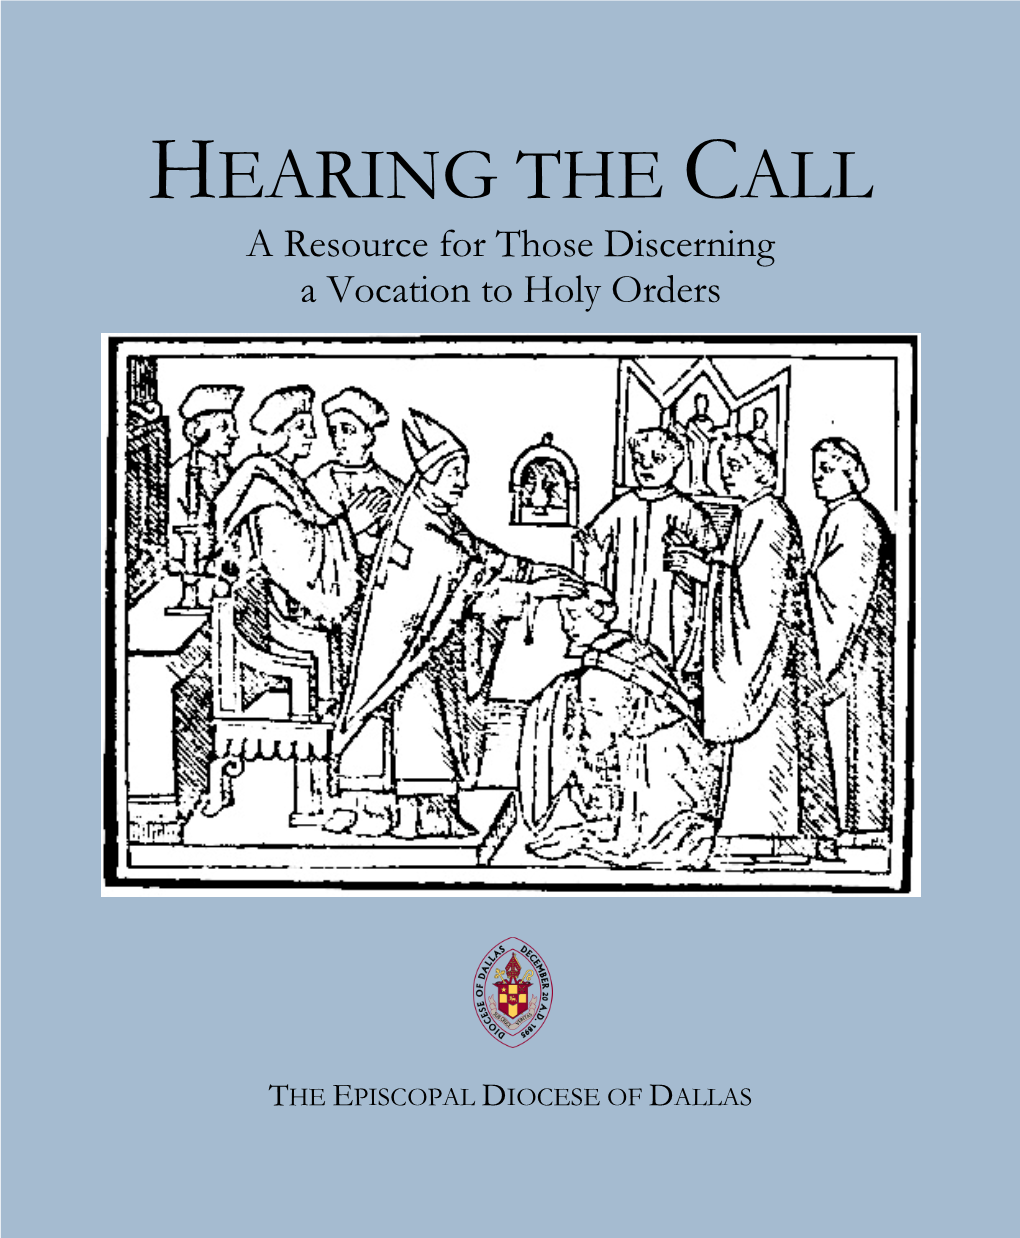 HEARING the CALL a Resource for Those Discerning a Vocation to Holy Orders